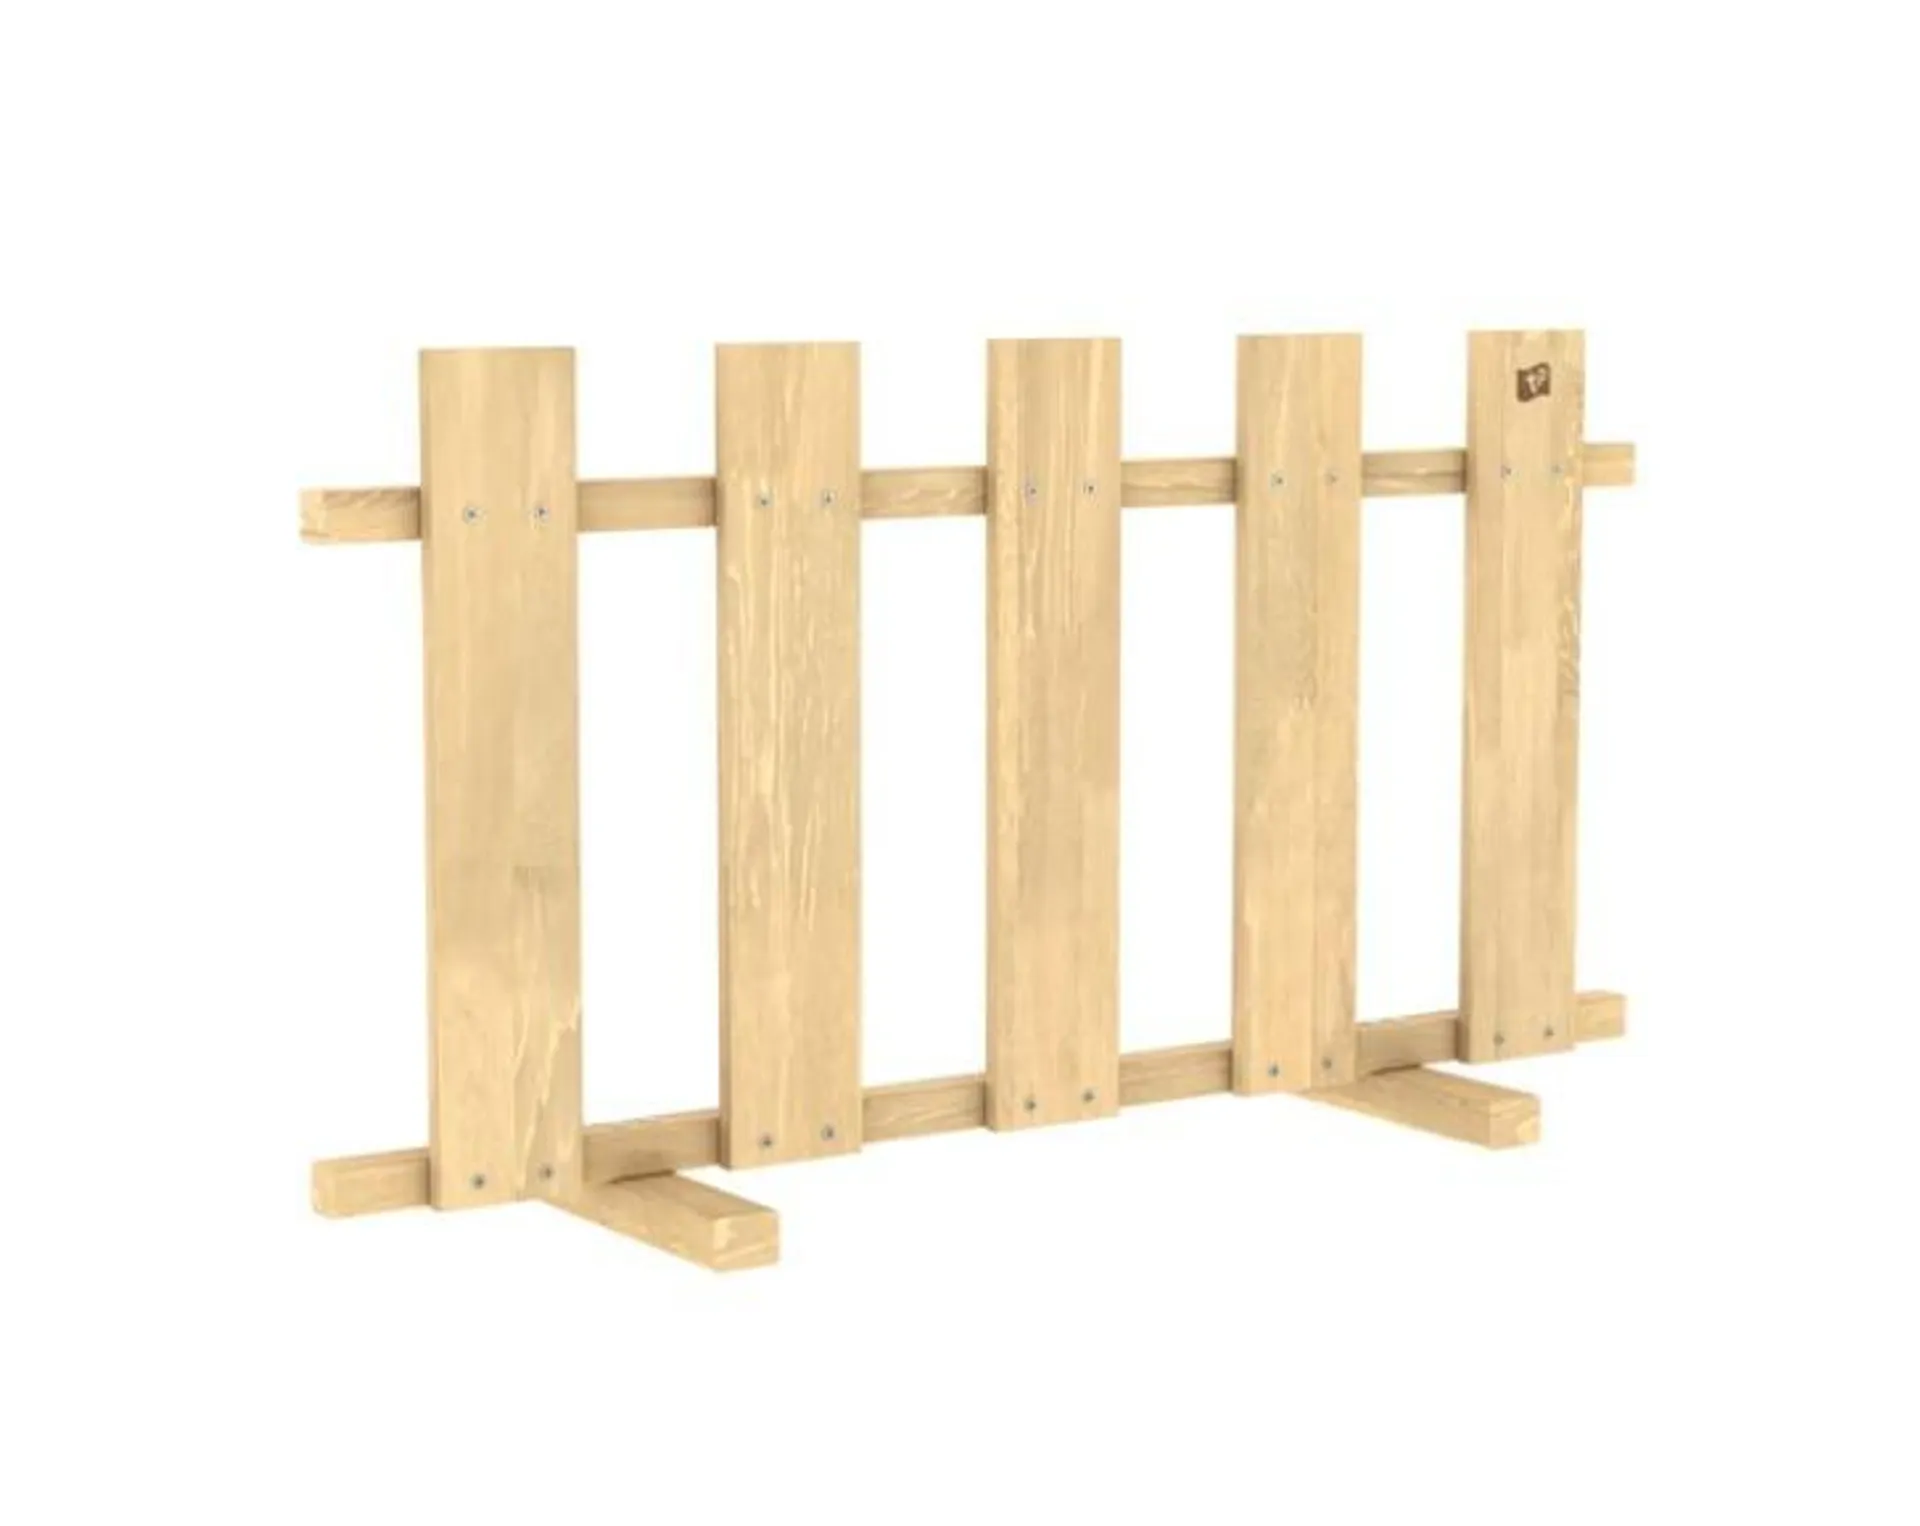 TP Picket Fence Accessory for a Play House